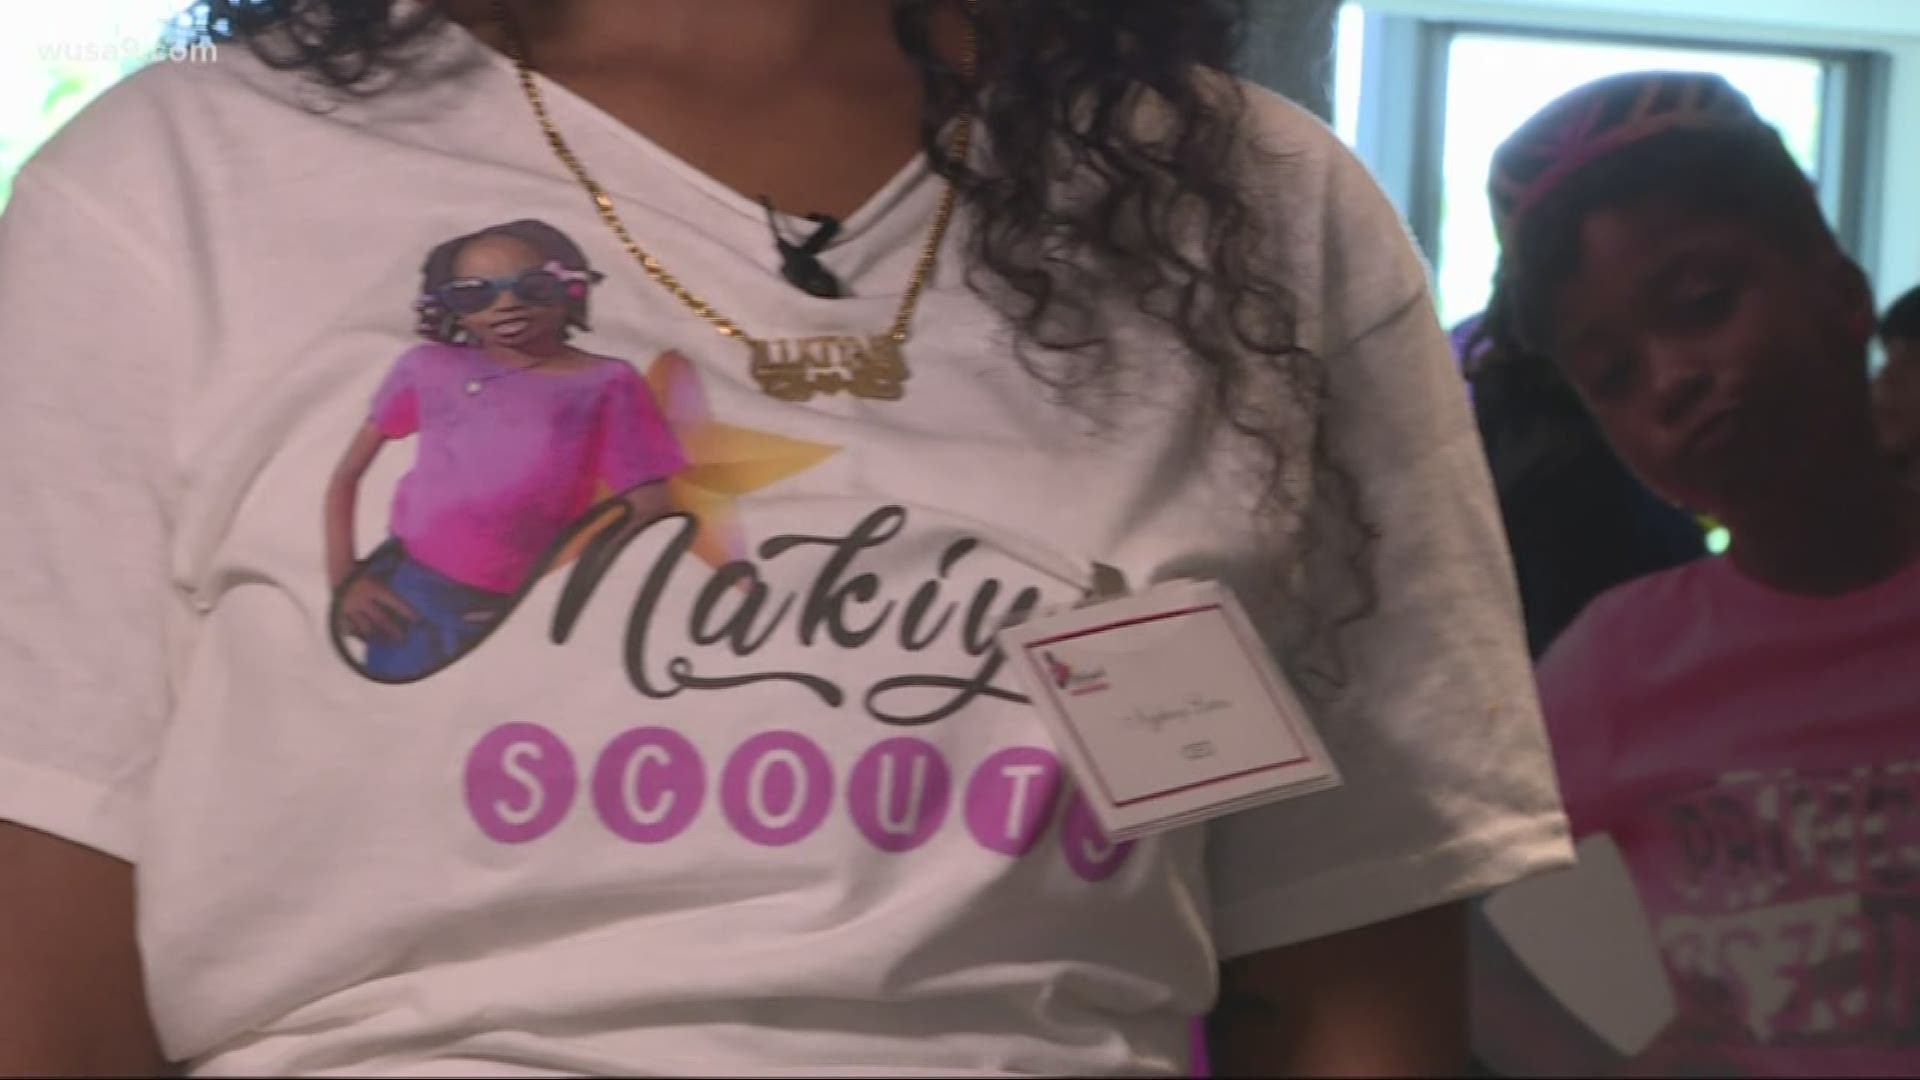 The family of Makiyah Wilson decided to honor her legacy by starting a mentorship program called ‘Makiyah Scouts.’ Makiyah is the 10-year-old girl who was killed in Clay Terrace almost 1 year ago. Her family recently announced a civil lawsuit against the city, and a criminal trial for the suspects is set for next year.